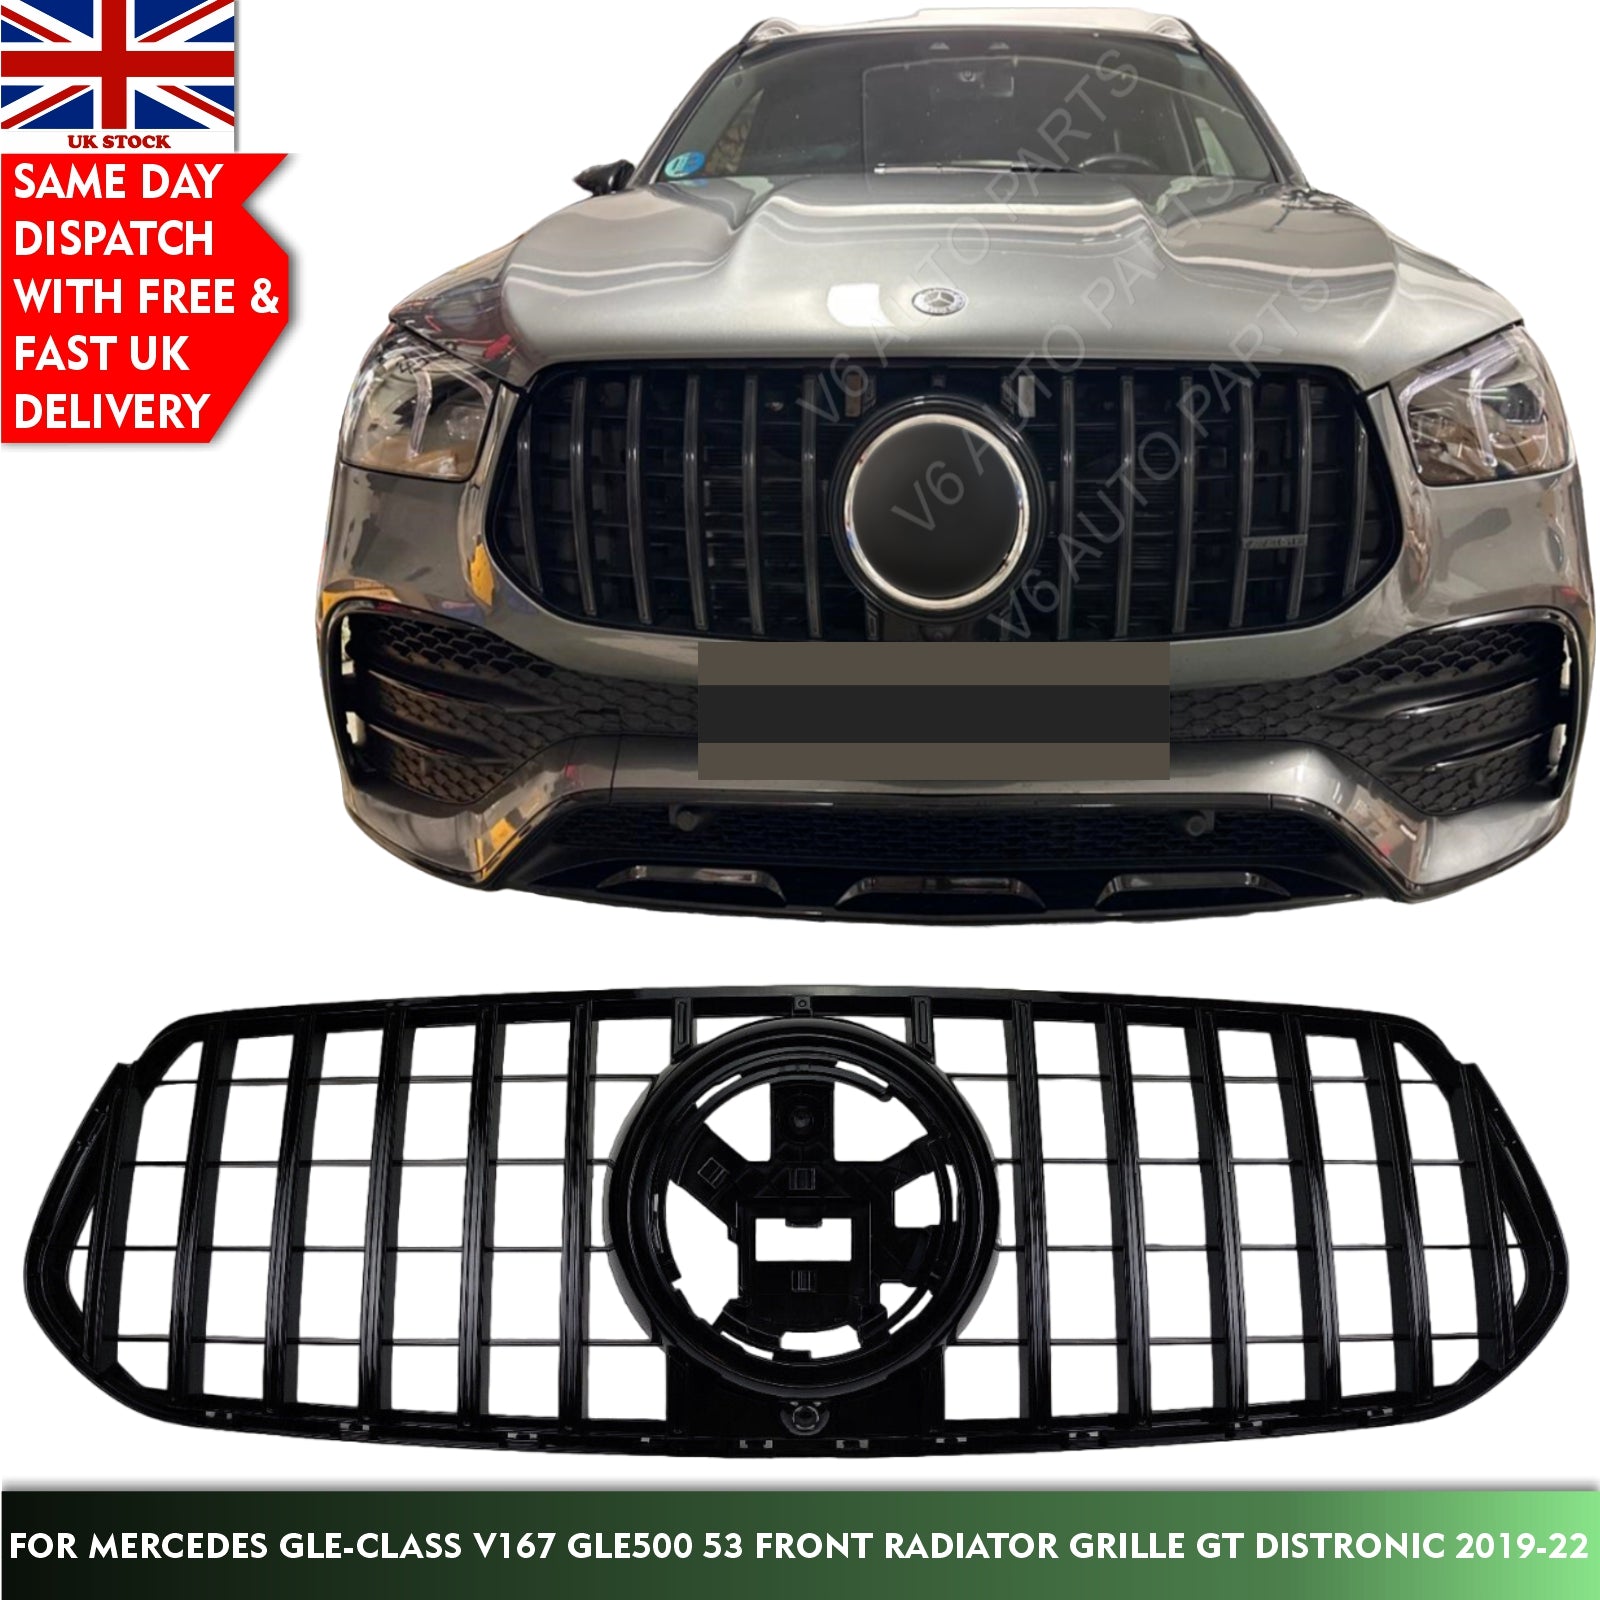 For Mercedes GLE-Class V167 GLE500 53 Front Radiator Grille GT Distronic 2019-22